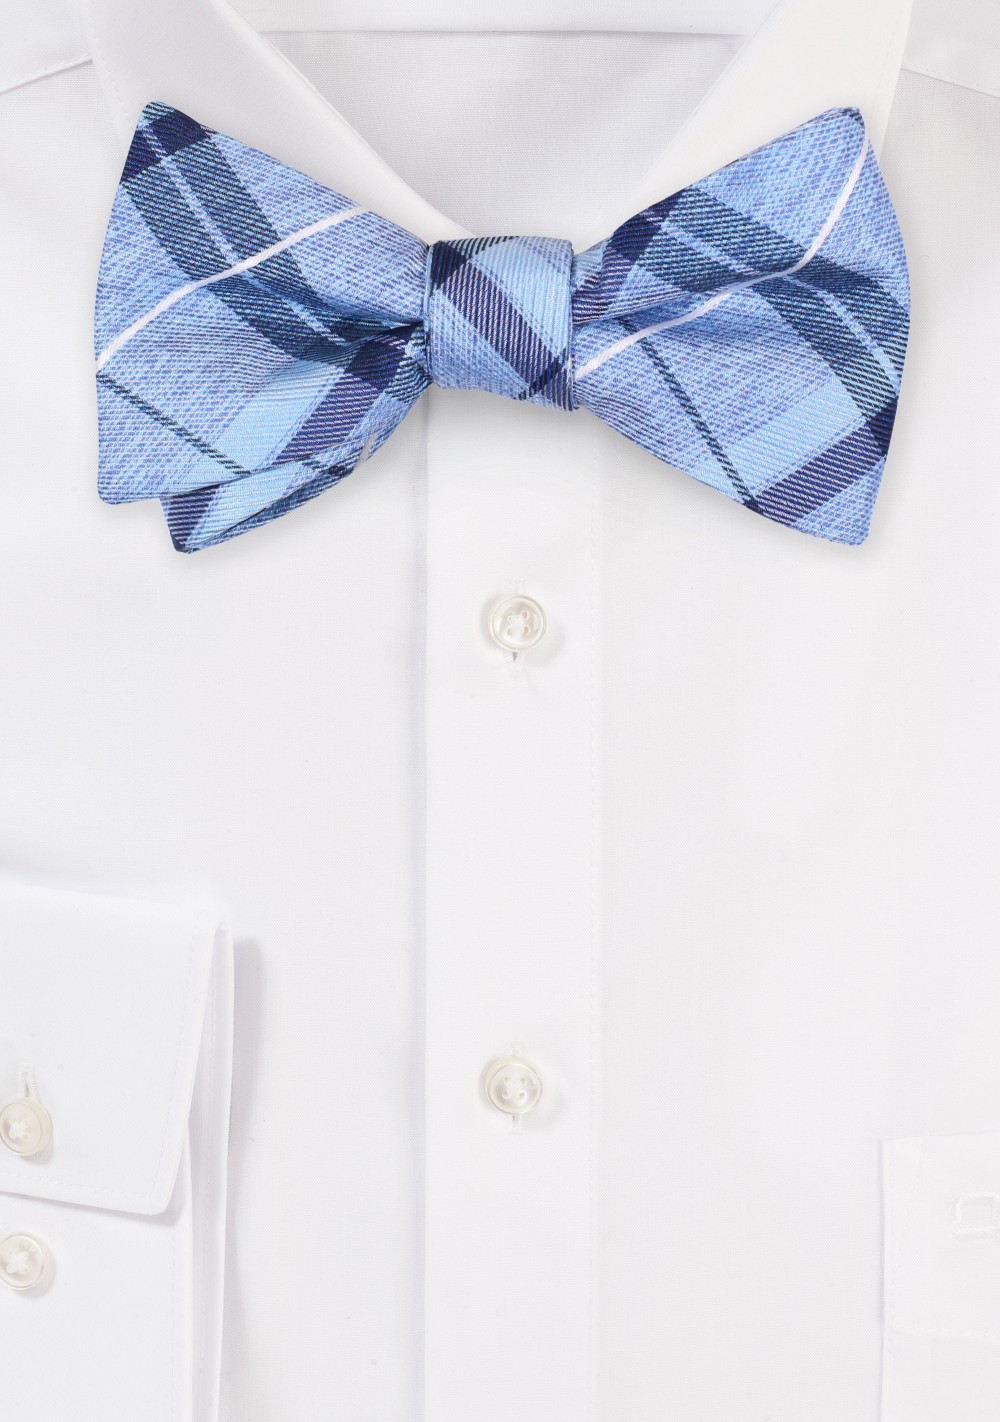 Checkered Bowtie in Blues